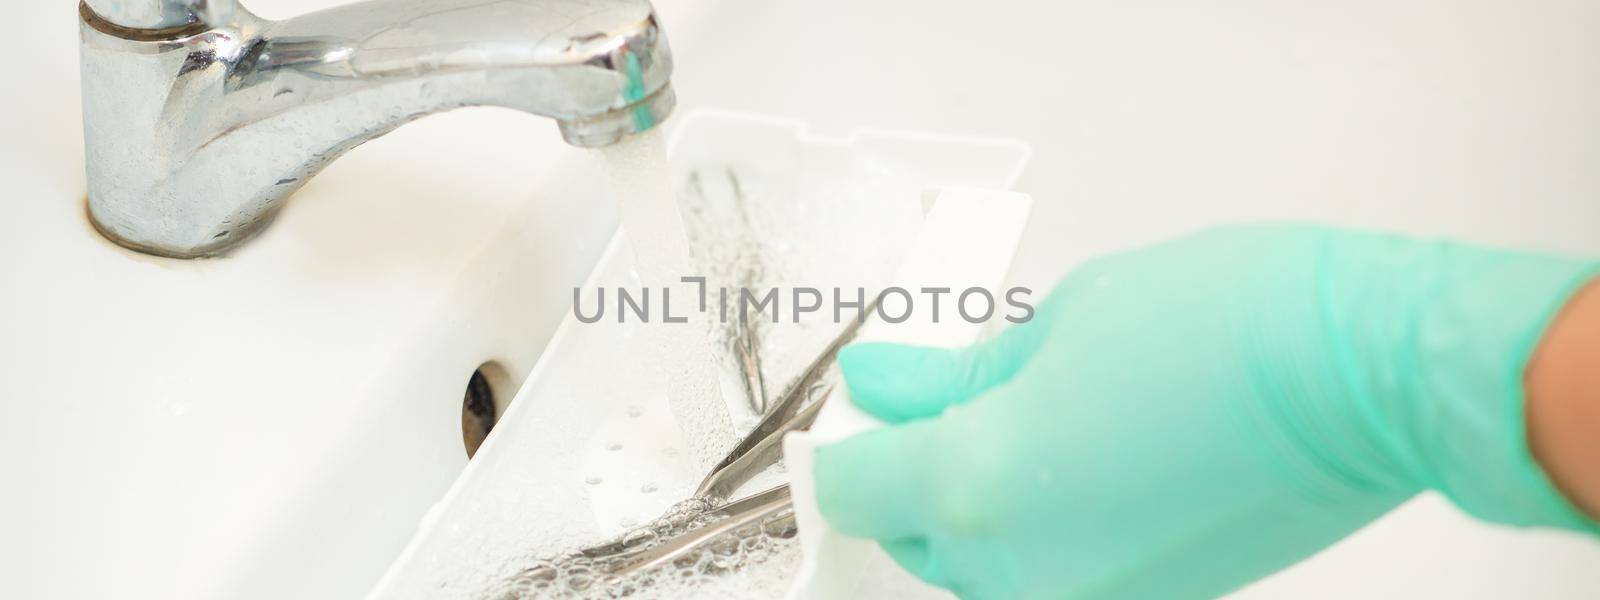 Hand in glove cleans the tweezers with water in-tray. Cleaning systems for tweezers